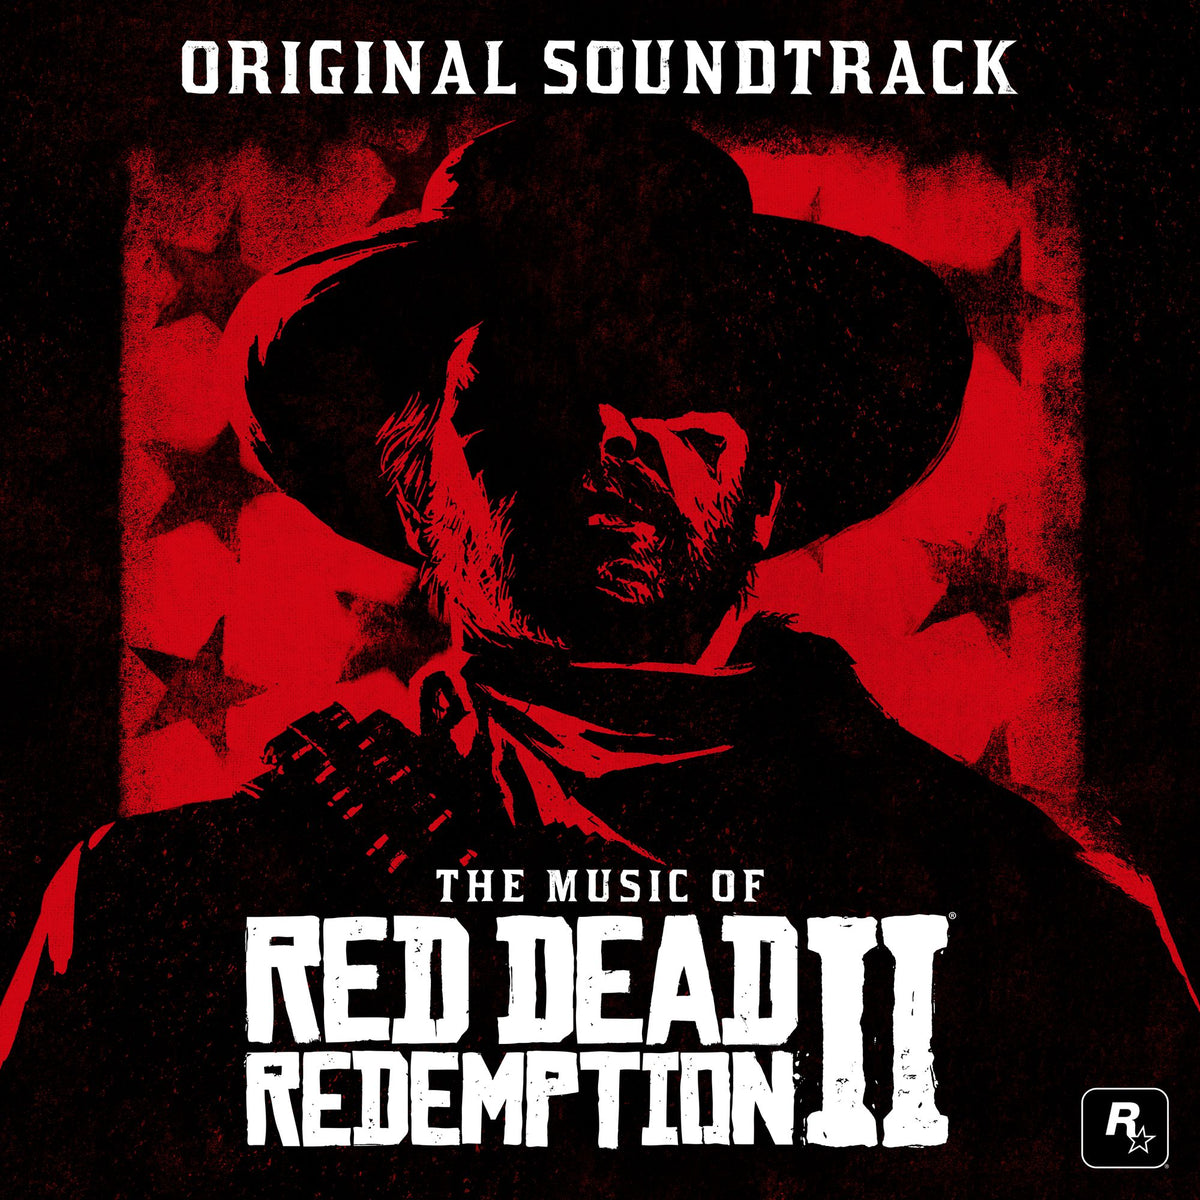 Various Artists - The Music of Red Dead Redemption 2 (Original Soundtrack) - LKS35399